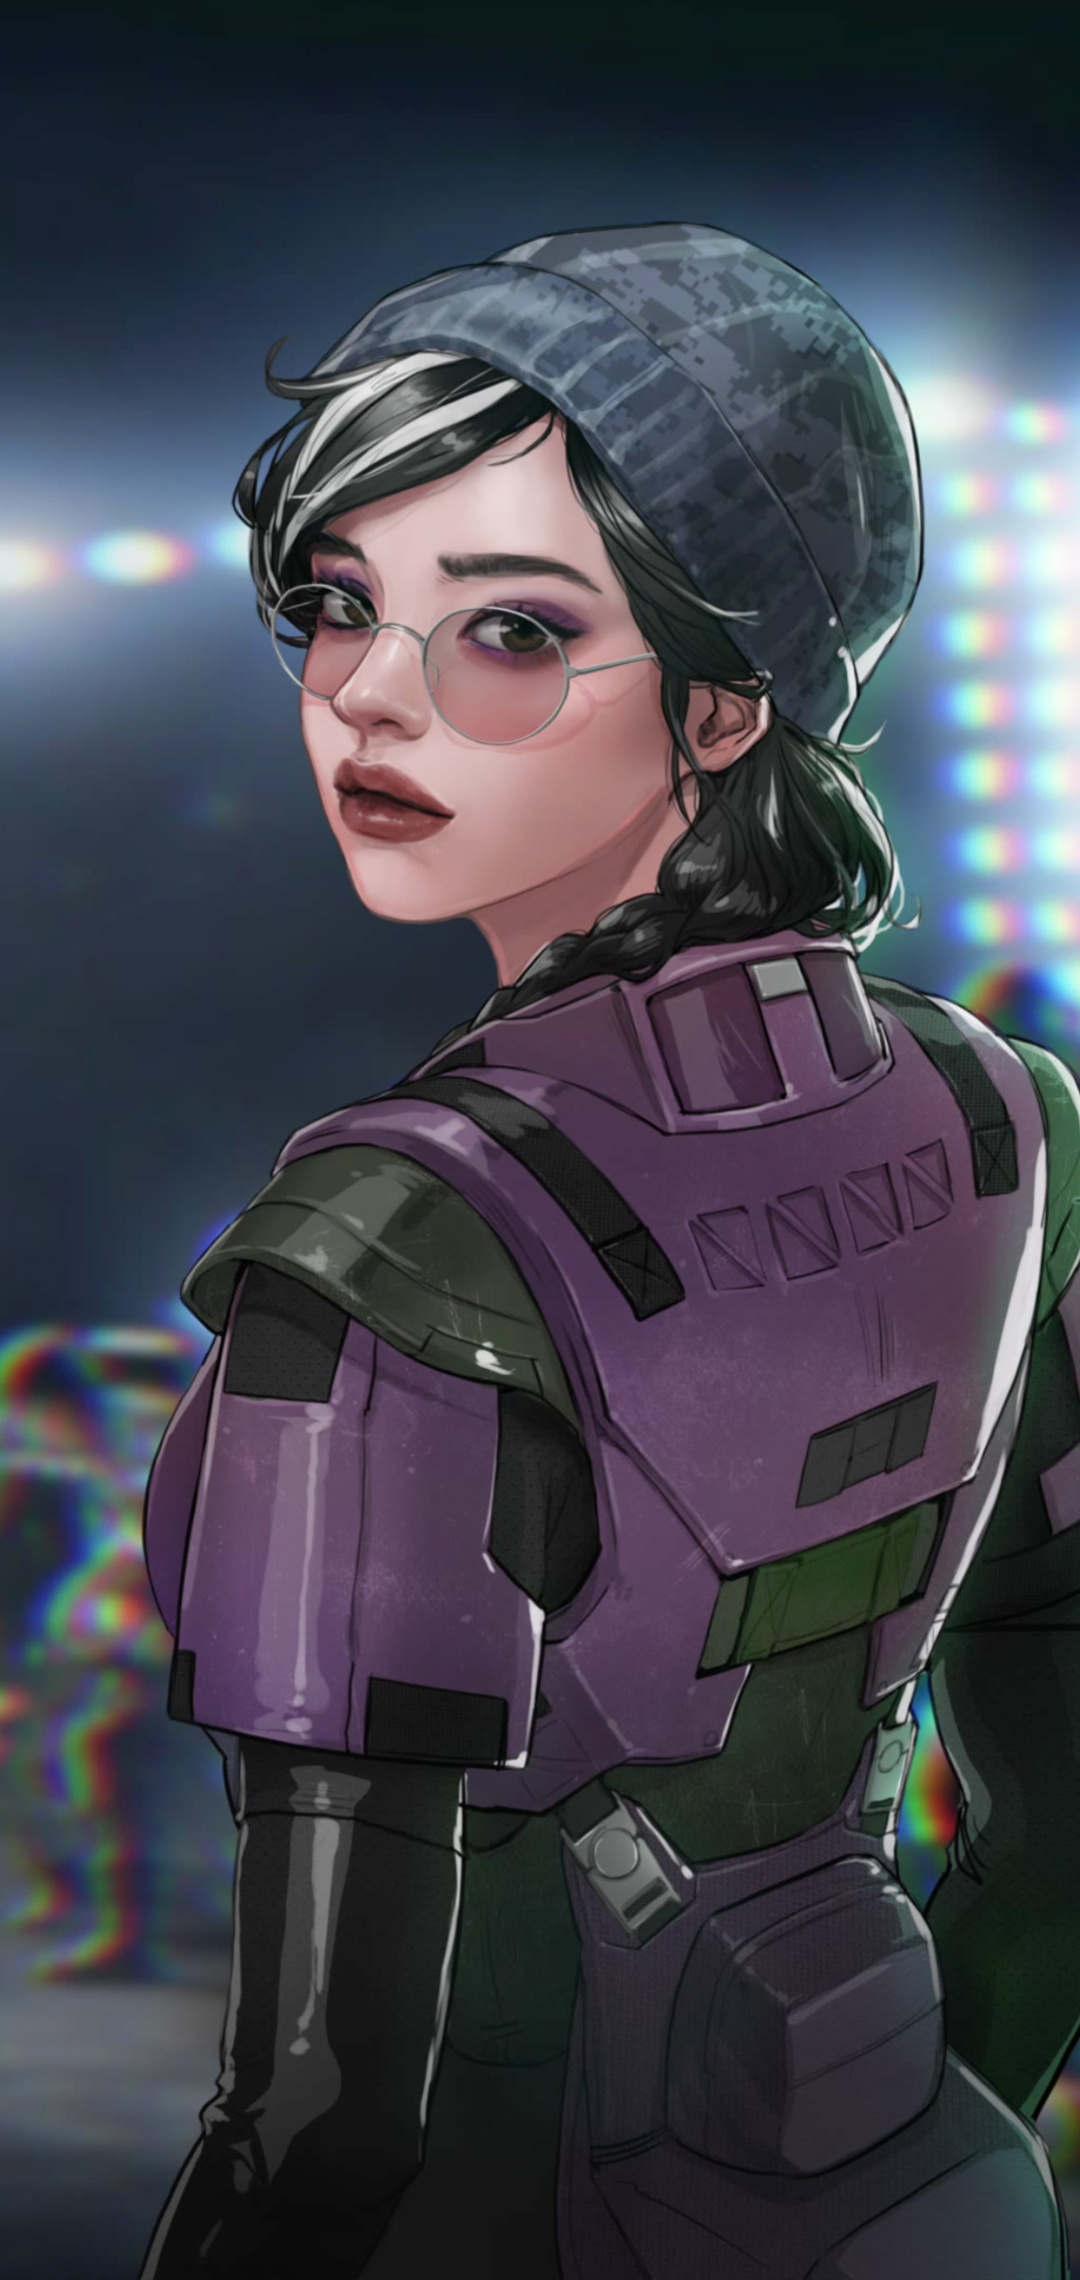 1080x2280 Rainbow Six Siege Dokkaebi Artwork 4k One Plus 6,Huawei p20,Honor  view 10,Vivo y85,Oppo f7,Xiaomi Mi A2 HD 4k Wallpapers, Images,  Backgrounds, Photos and Pictures